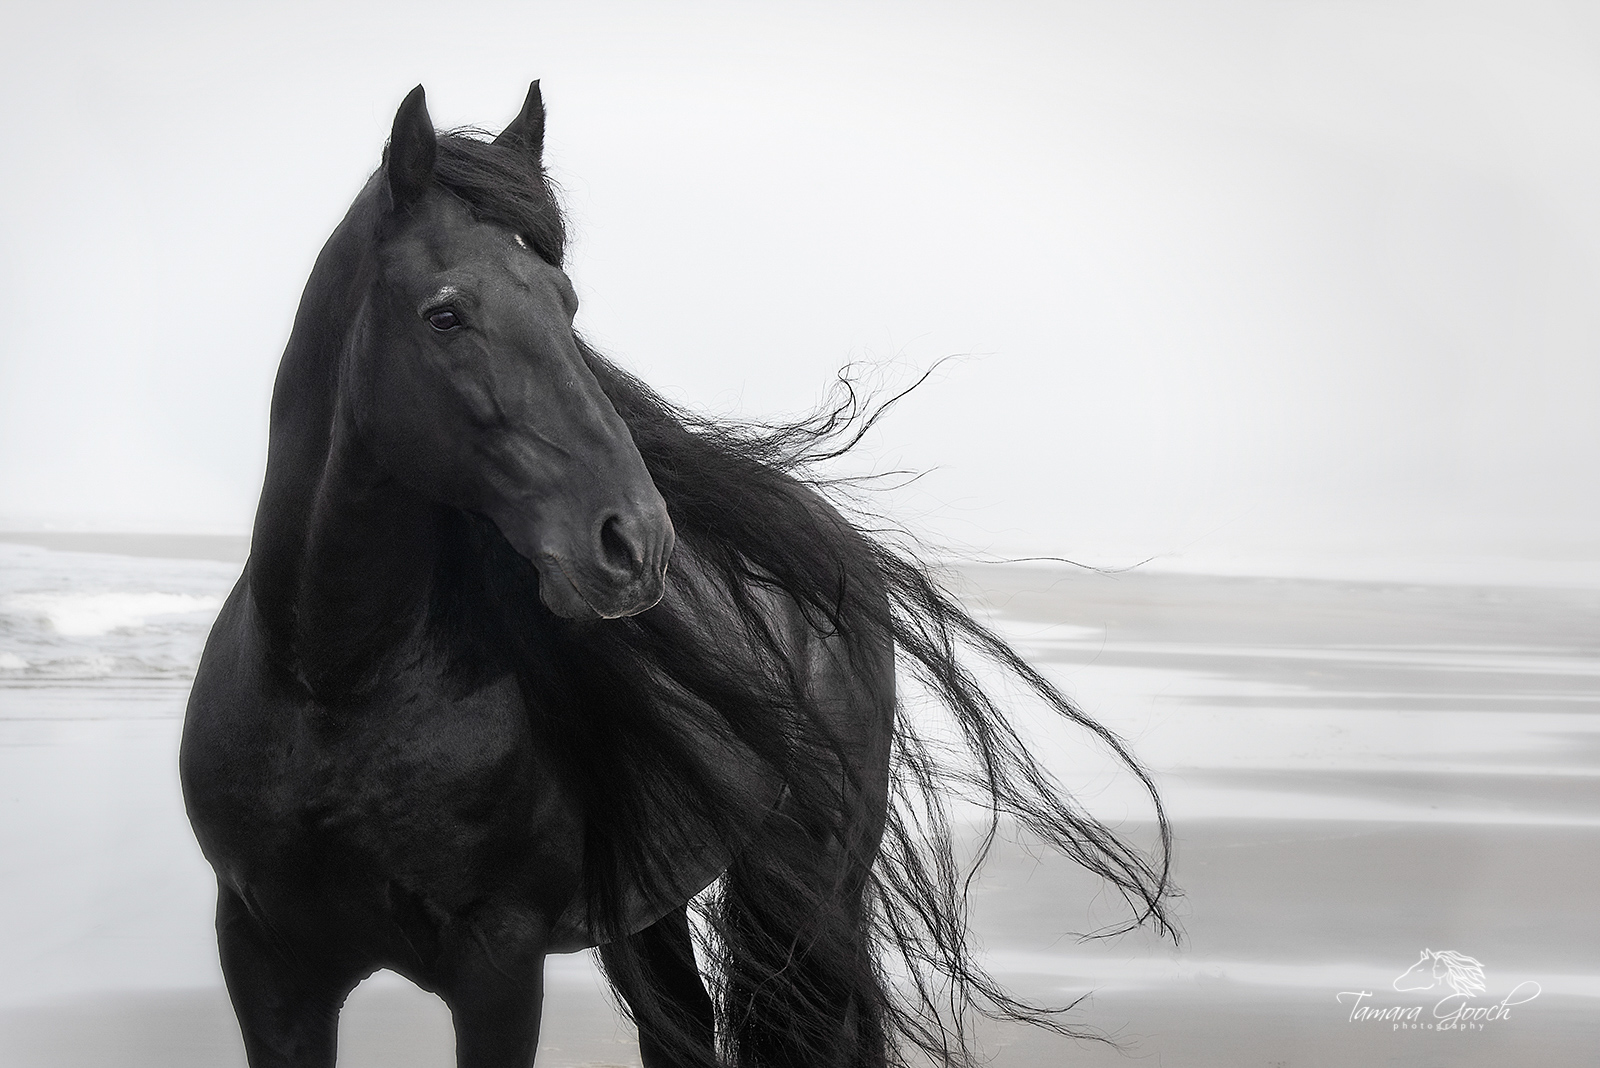 A black and white photo of a Friesian horse stallion standing on the beach